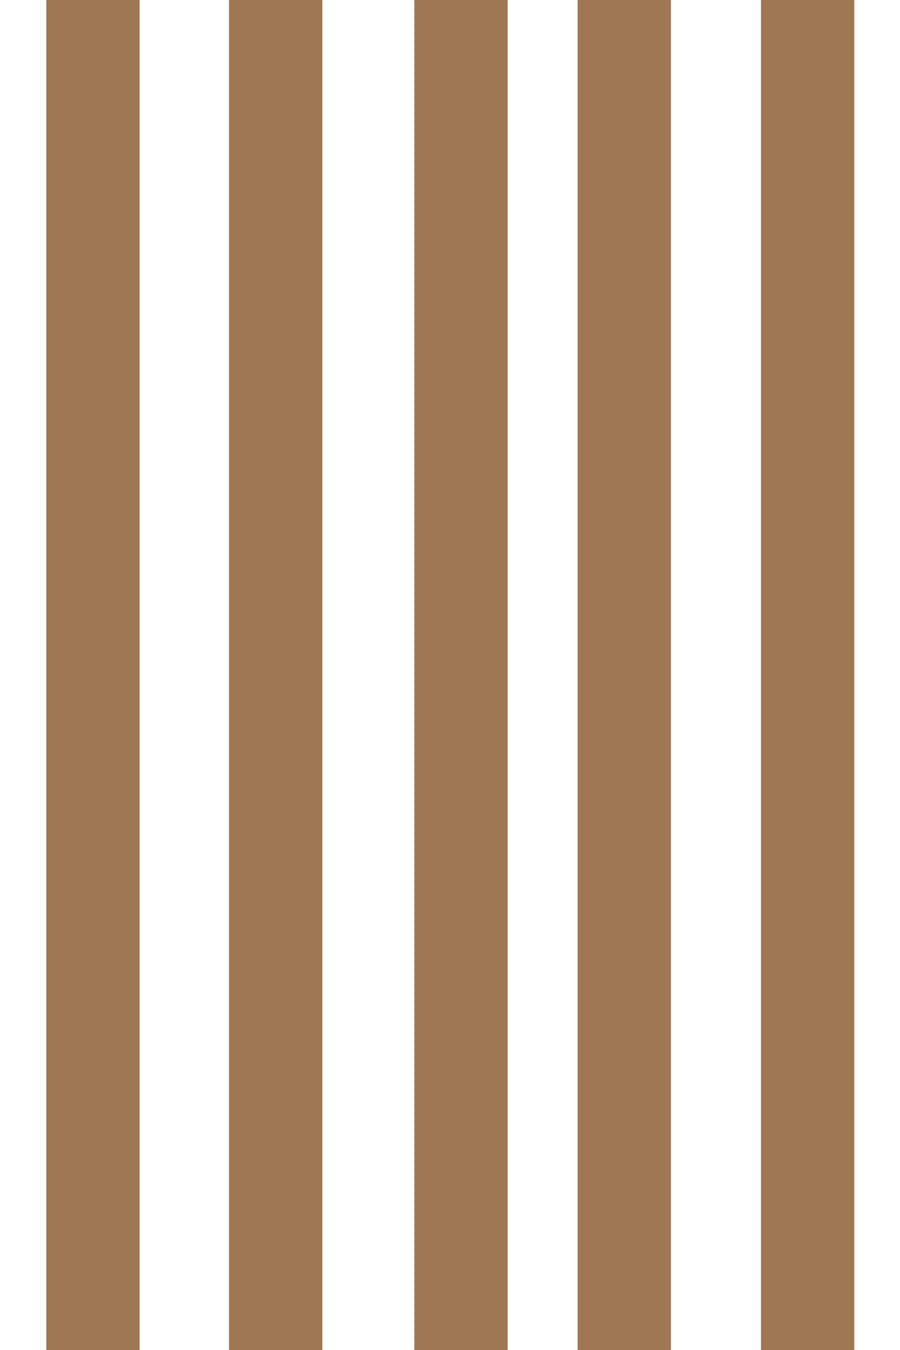 Woolf With Me Fitted Crib Sheet Stripes color_camel